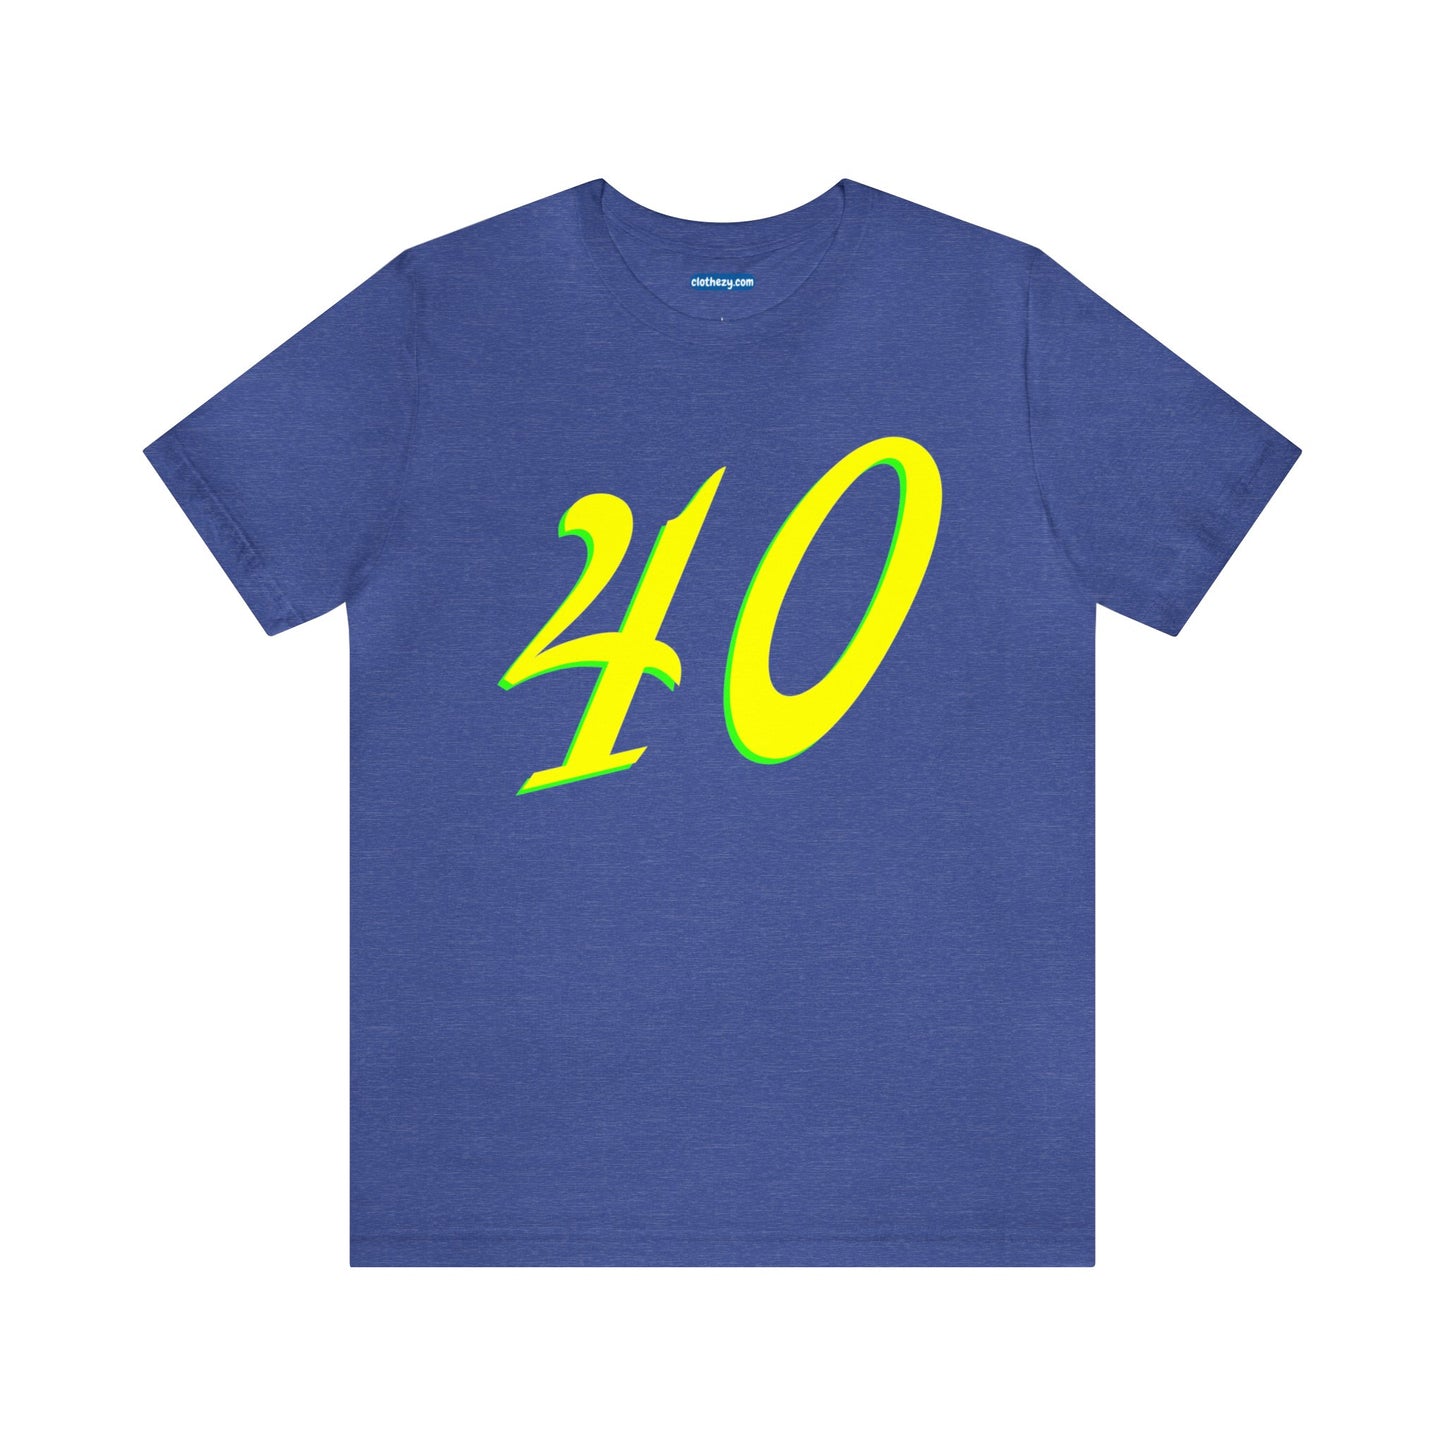 Number 40 Design - Soft Cotton Tee for birthdays and celebrations, Gift for friends and family, Multiple Options by clothezy.com in Royal Blue Heather Size Small - Buy Now